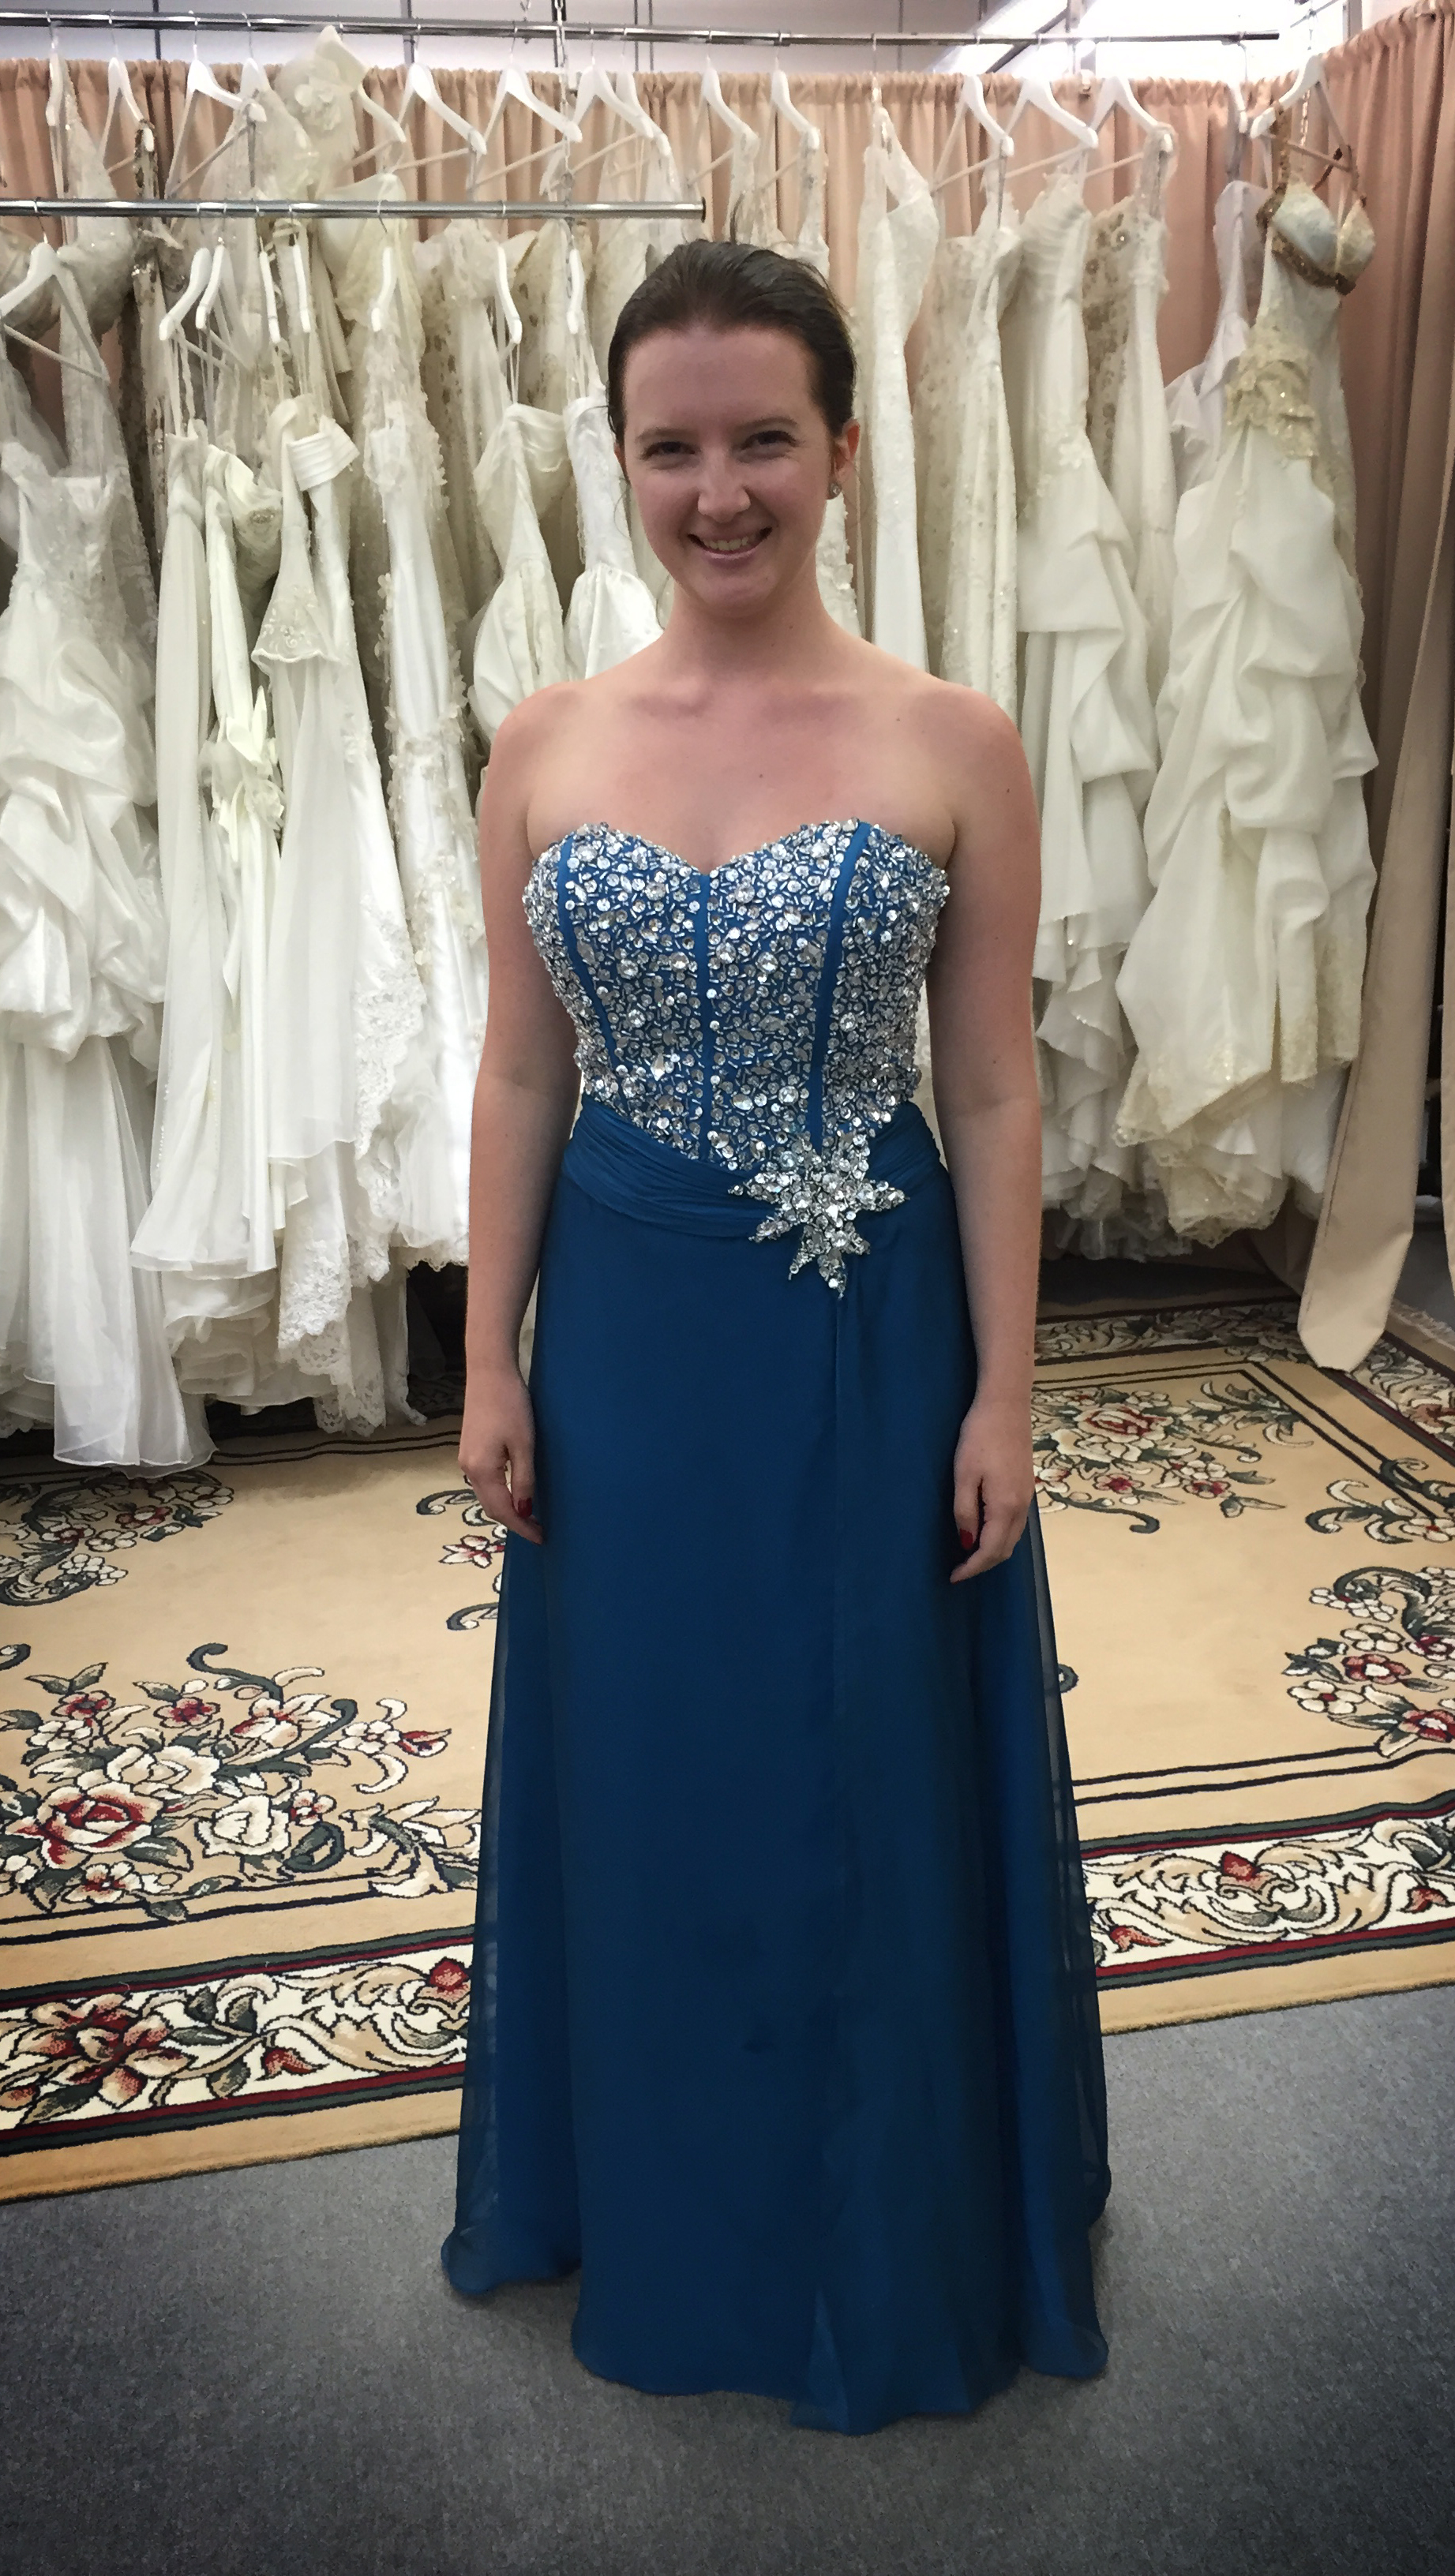  Emily had her dress taken in with beading, and we had it turn around in a day, she is impressed with the finish and the time frame.  